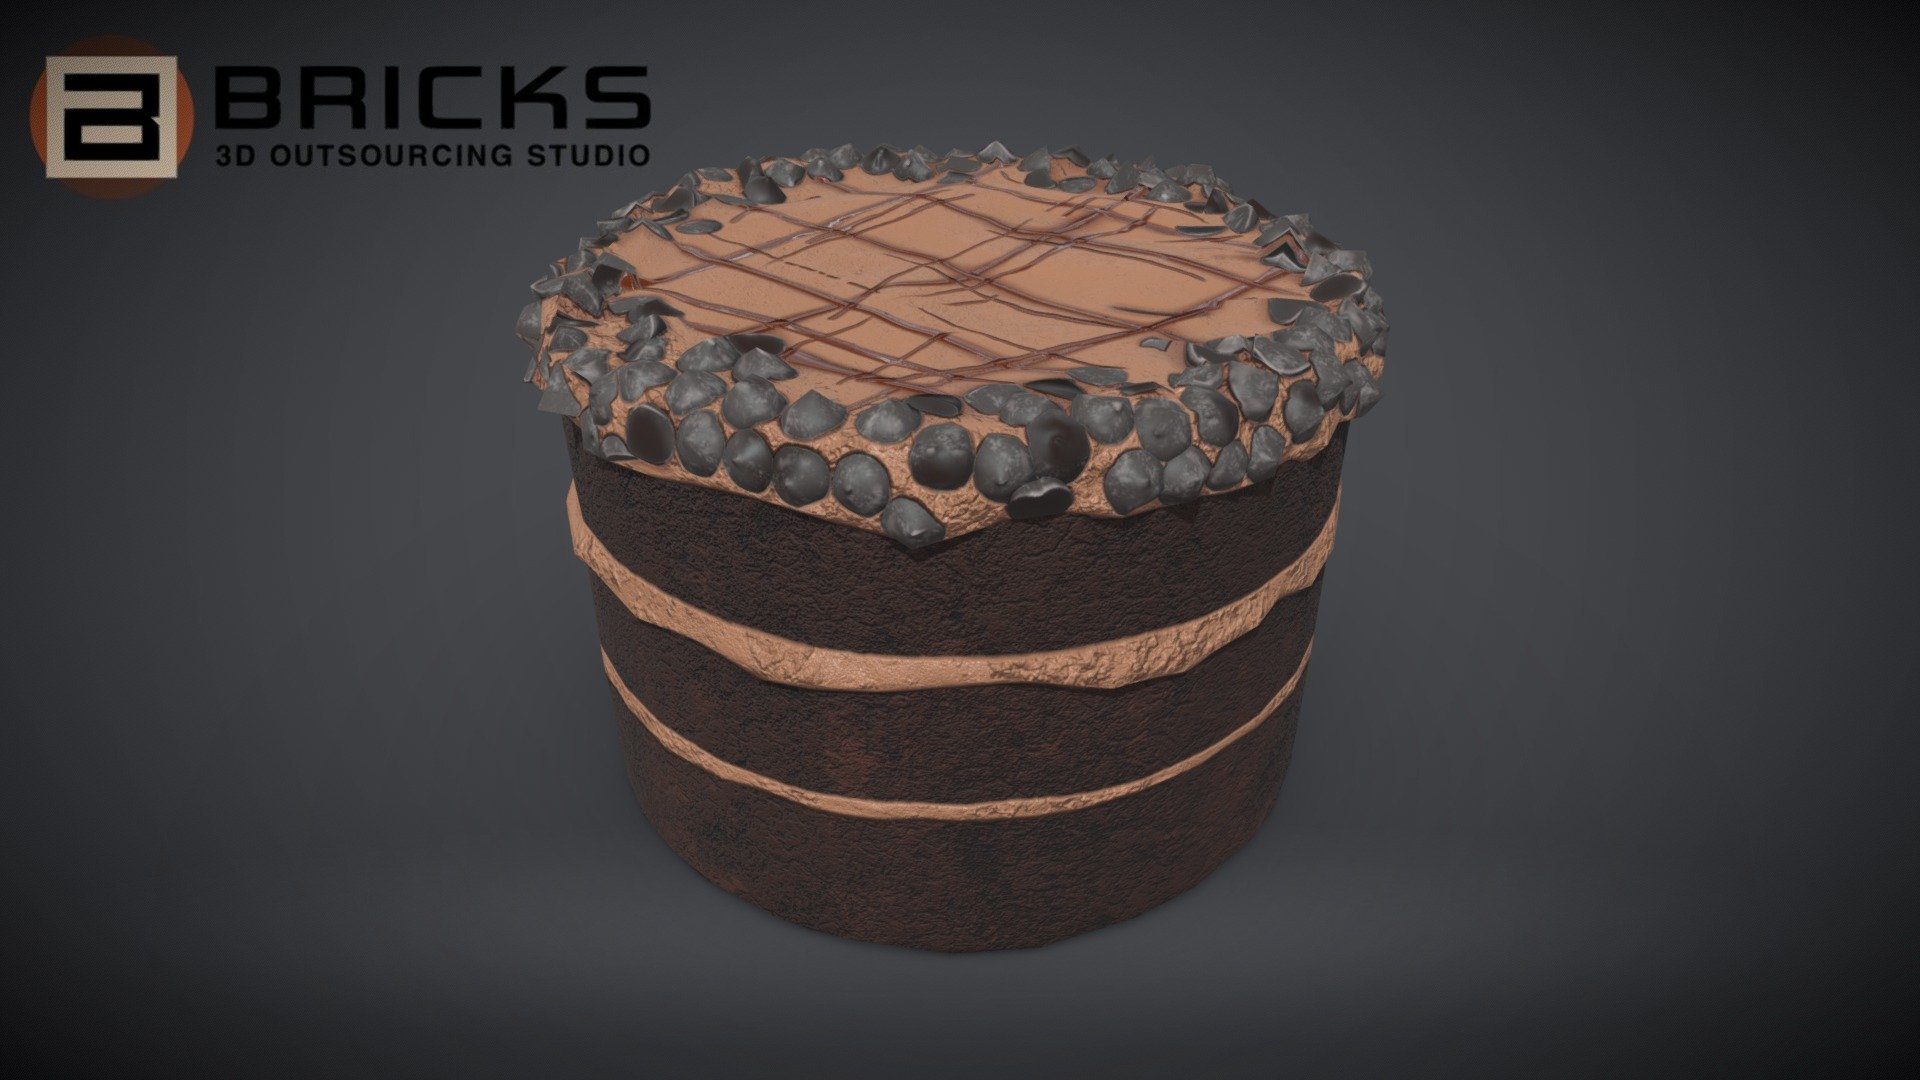 PBR Food Asset:
ChocolateGateau
Polycount: 1564
Vertex count: 784
Texture Size: 2048px x 2048px
Normal: OpenGL

If you need any adjust in file please contact us: team@bricks3dstudio.com

Hire us: tringuyen@bricks3dstudio.com
Here is us: https://www.bricks3dstudio.com/
        https://www.artstation.com/bricksstudio
        https://www.facebook.com/Bricks3dstudio/
        https://www.linkedin.com/in/bricks-studio-b10462252/ - ChocolateGateau - Buy Royalty Free 3D model by Bricks Studio (@bricks3dstudio) 3d model